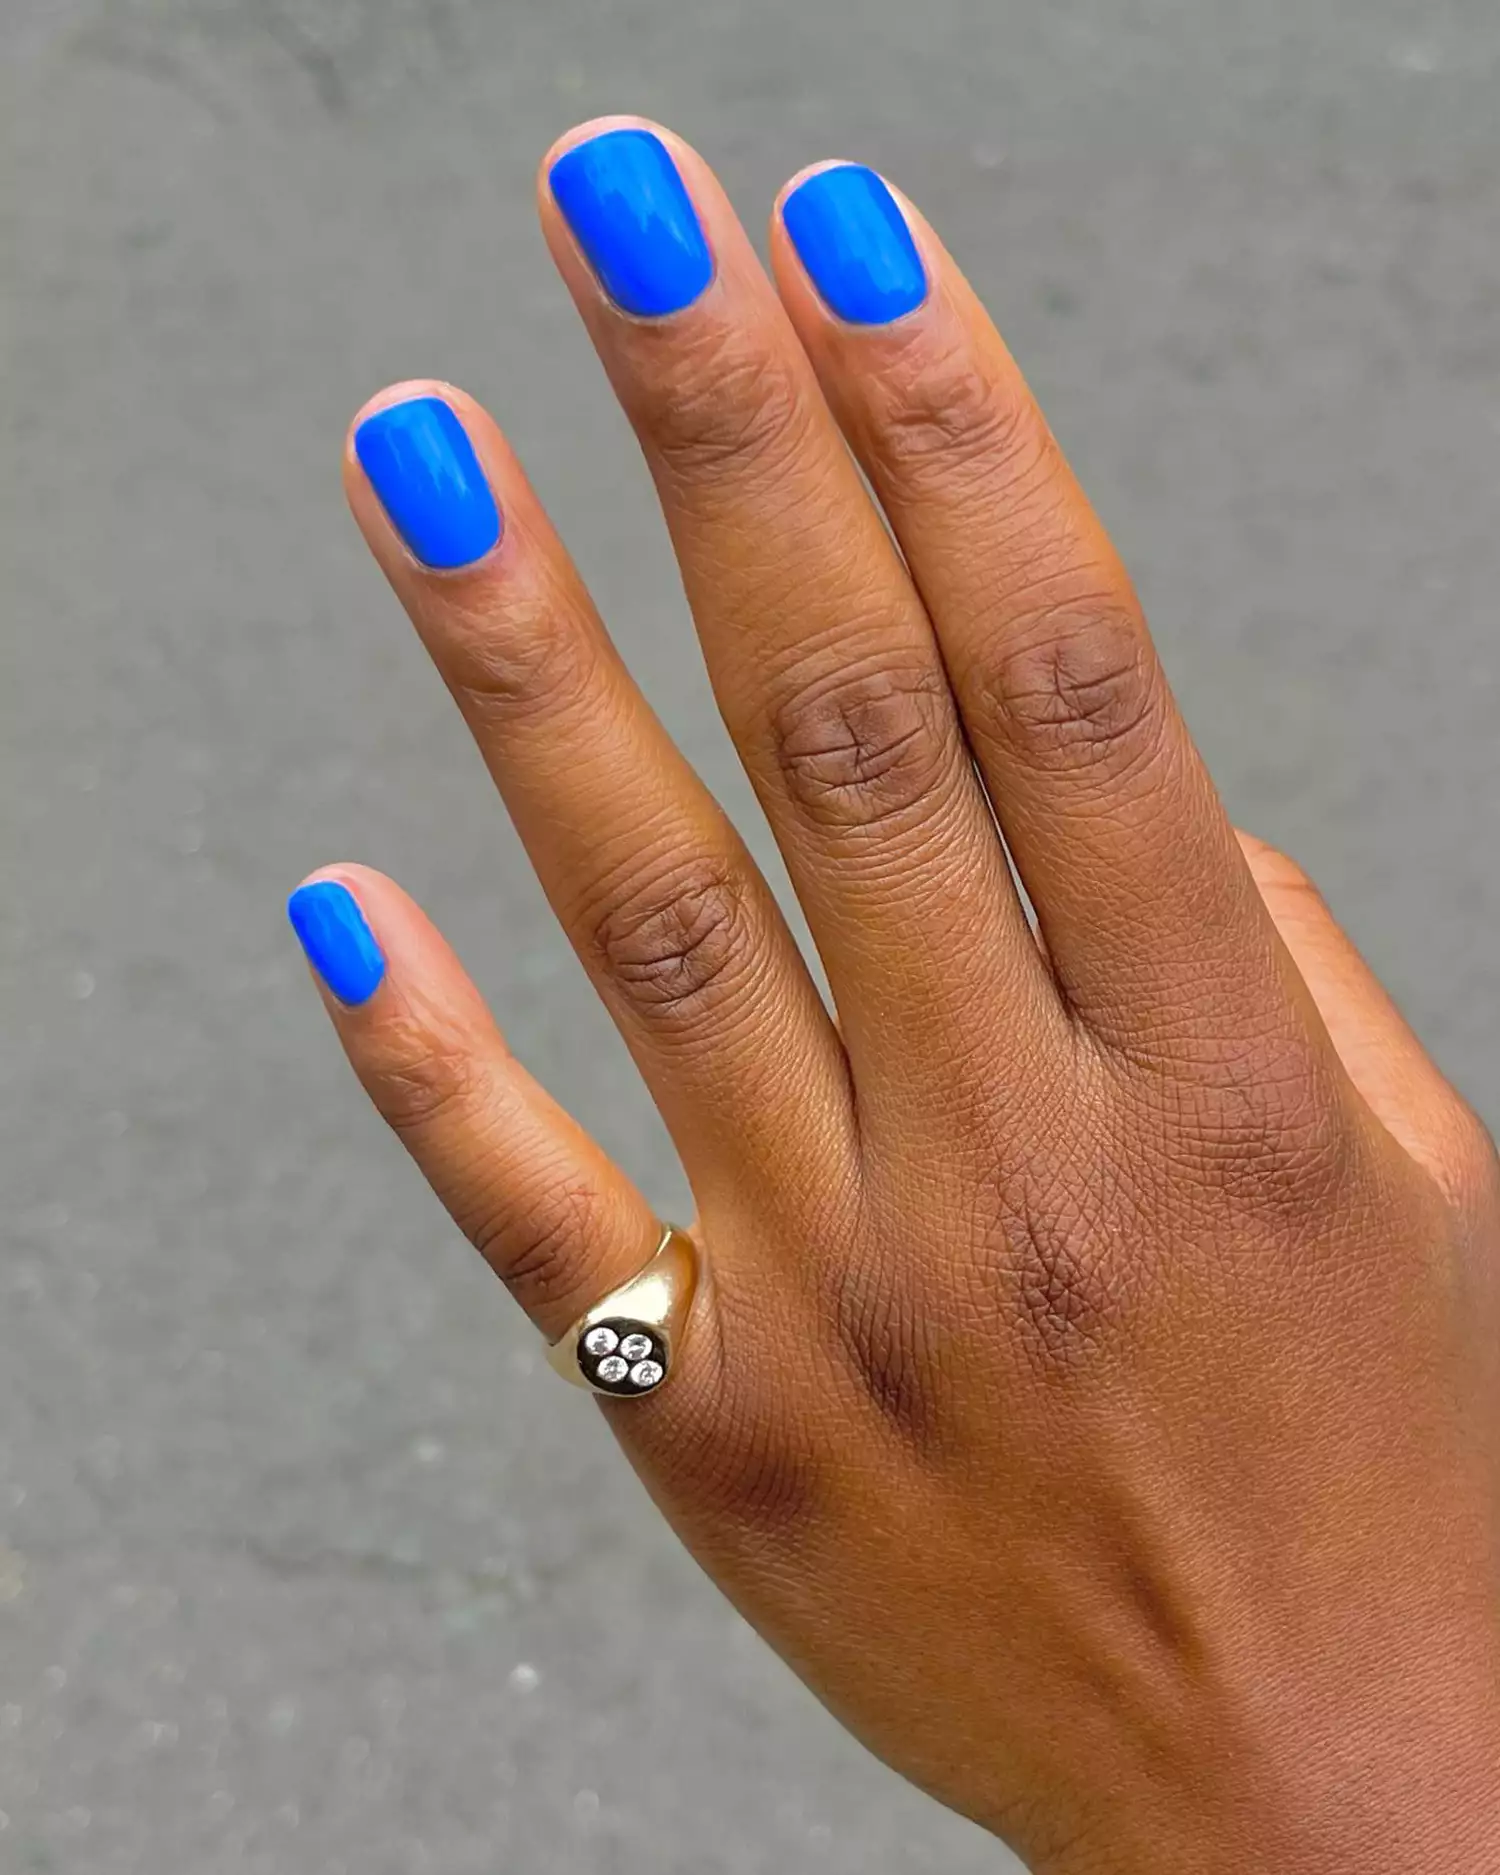 Electric blue nails by @paintedbyjools.